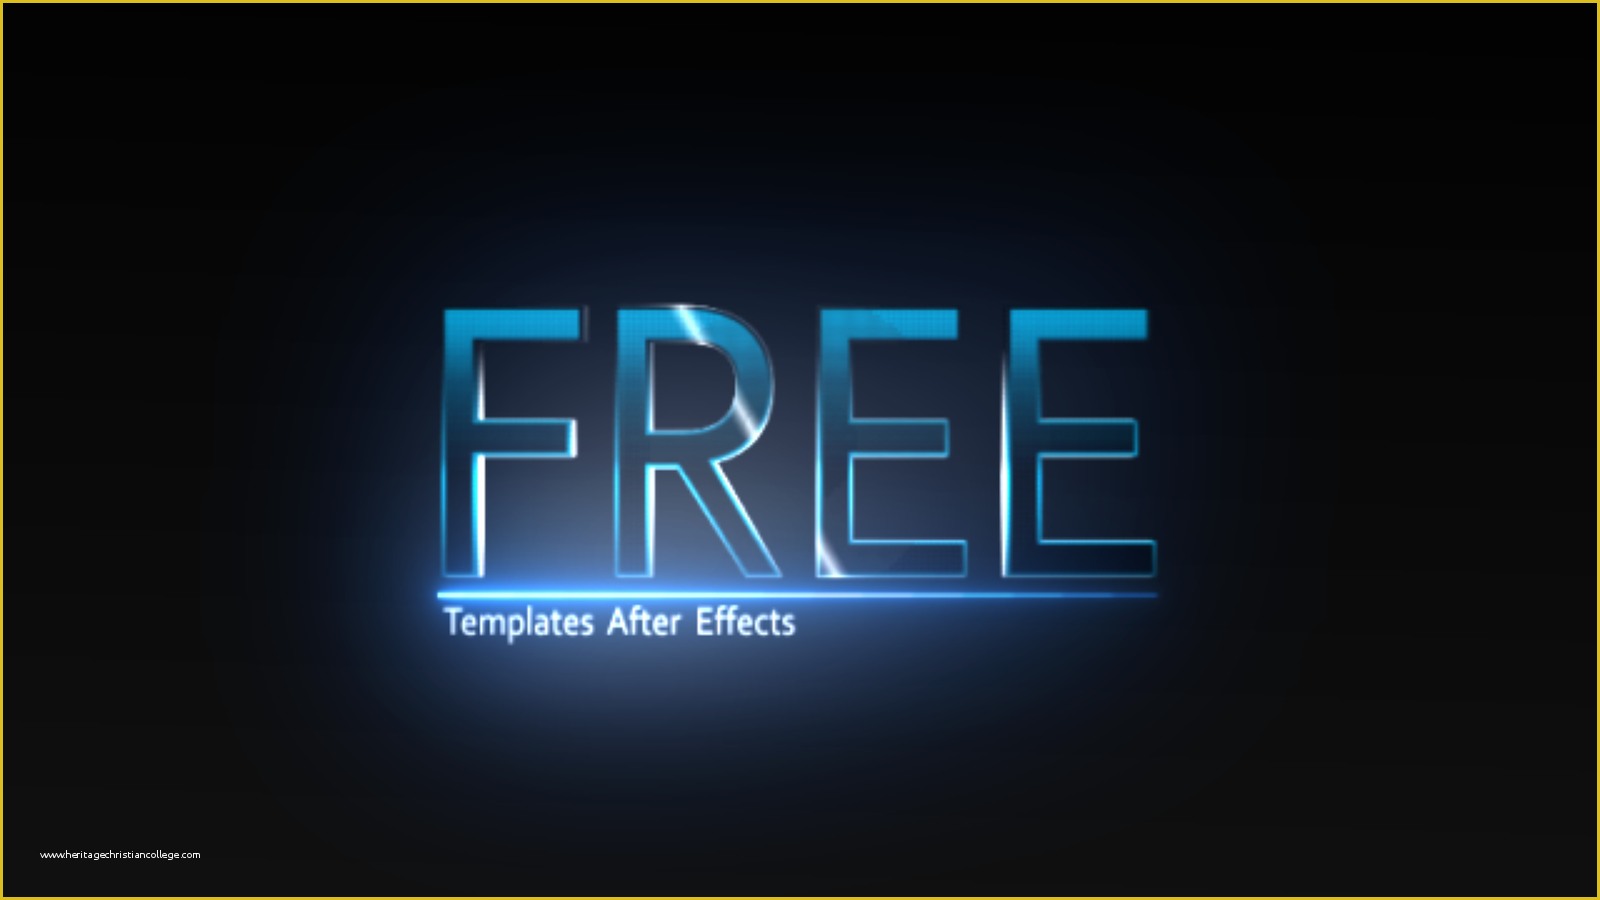 after-effects-holiday-templates-free-of-free-templates-after-effects